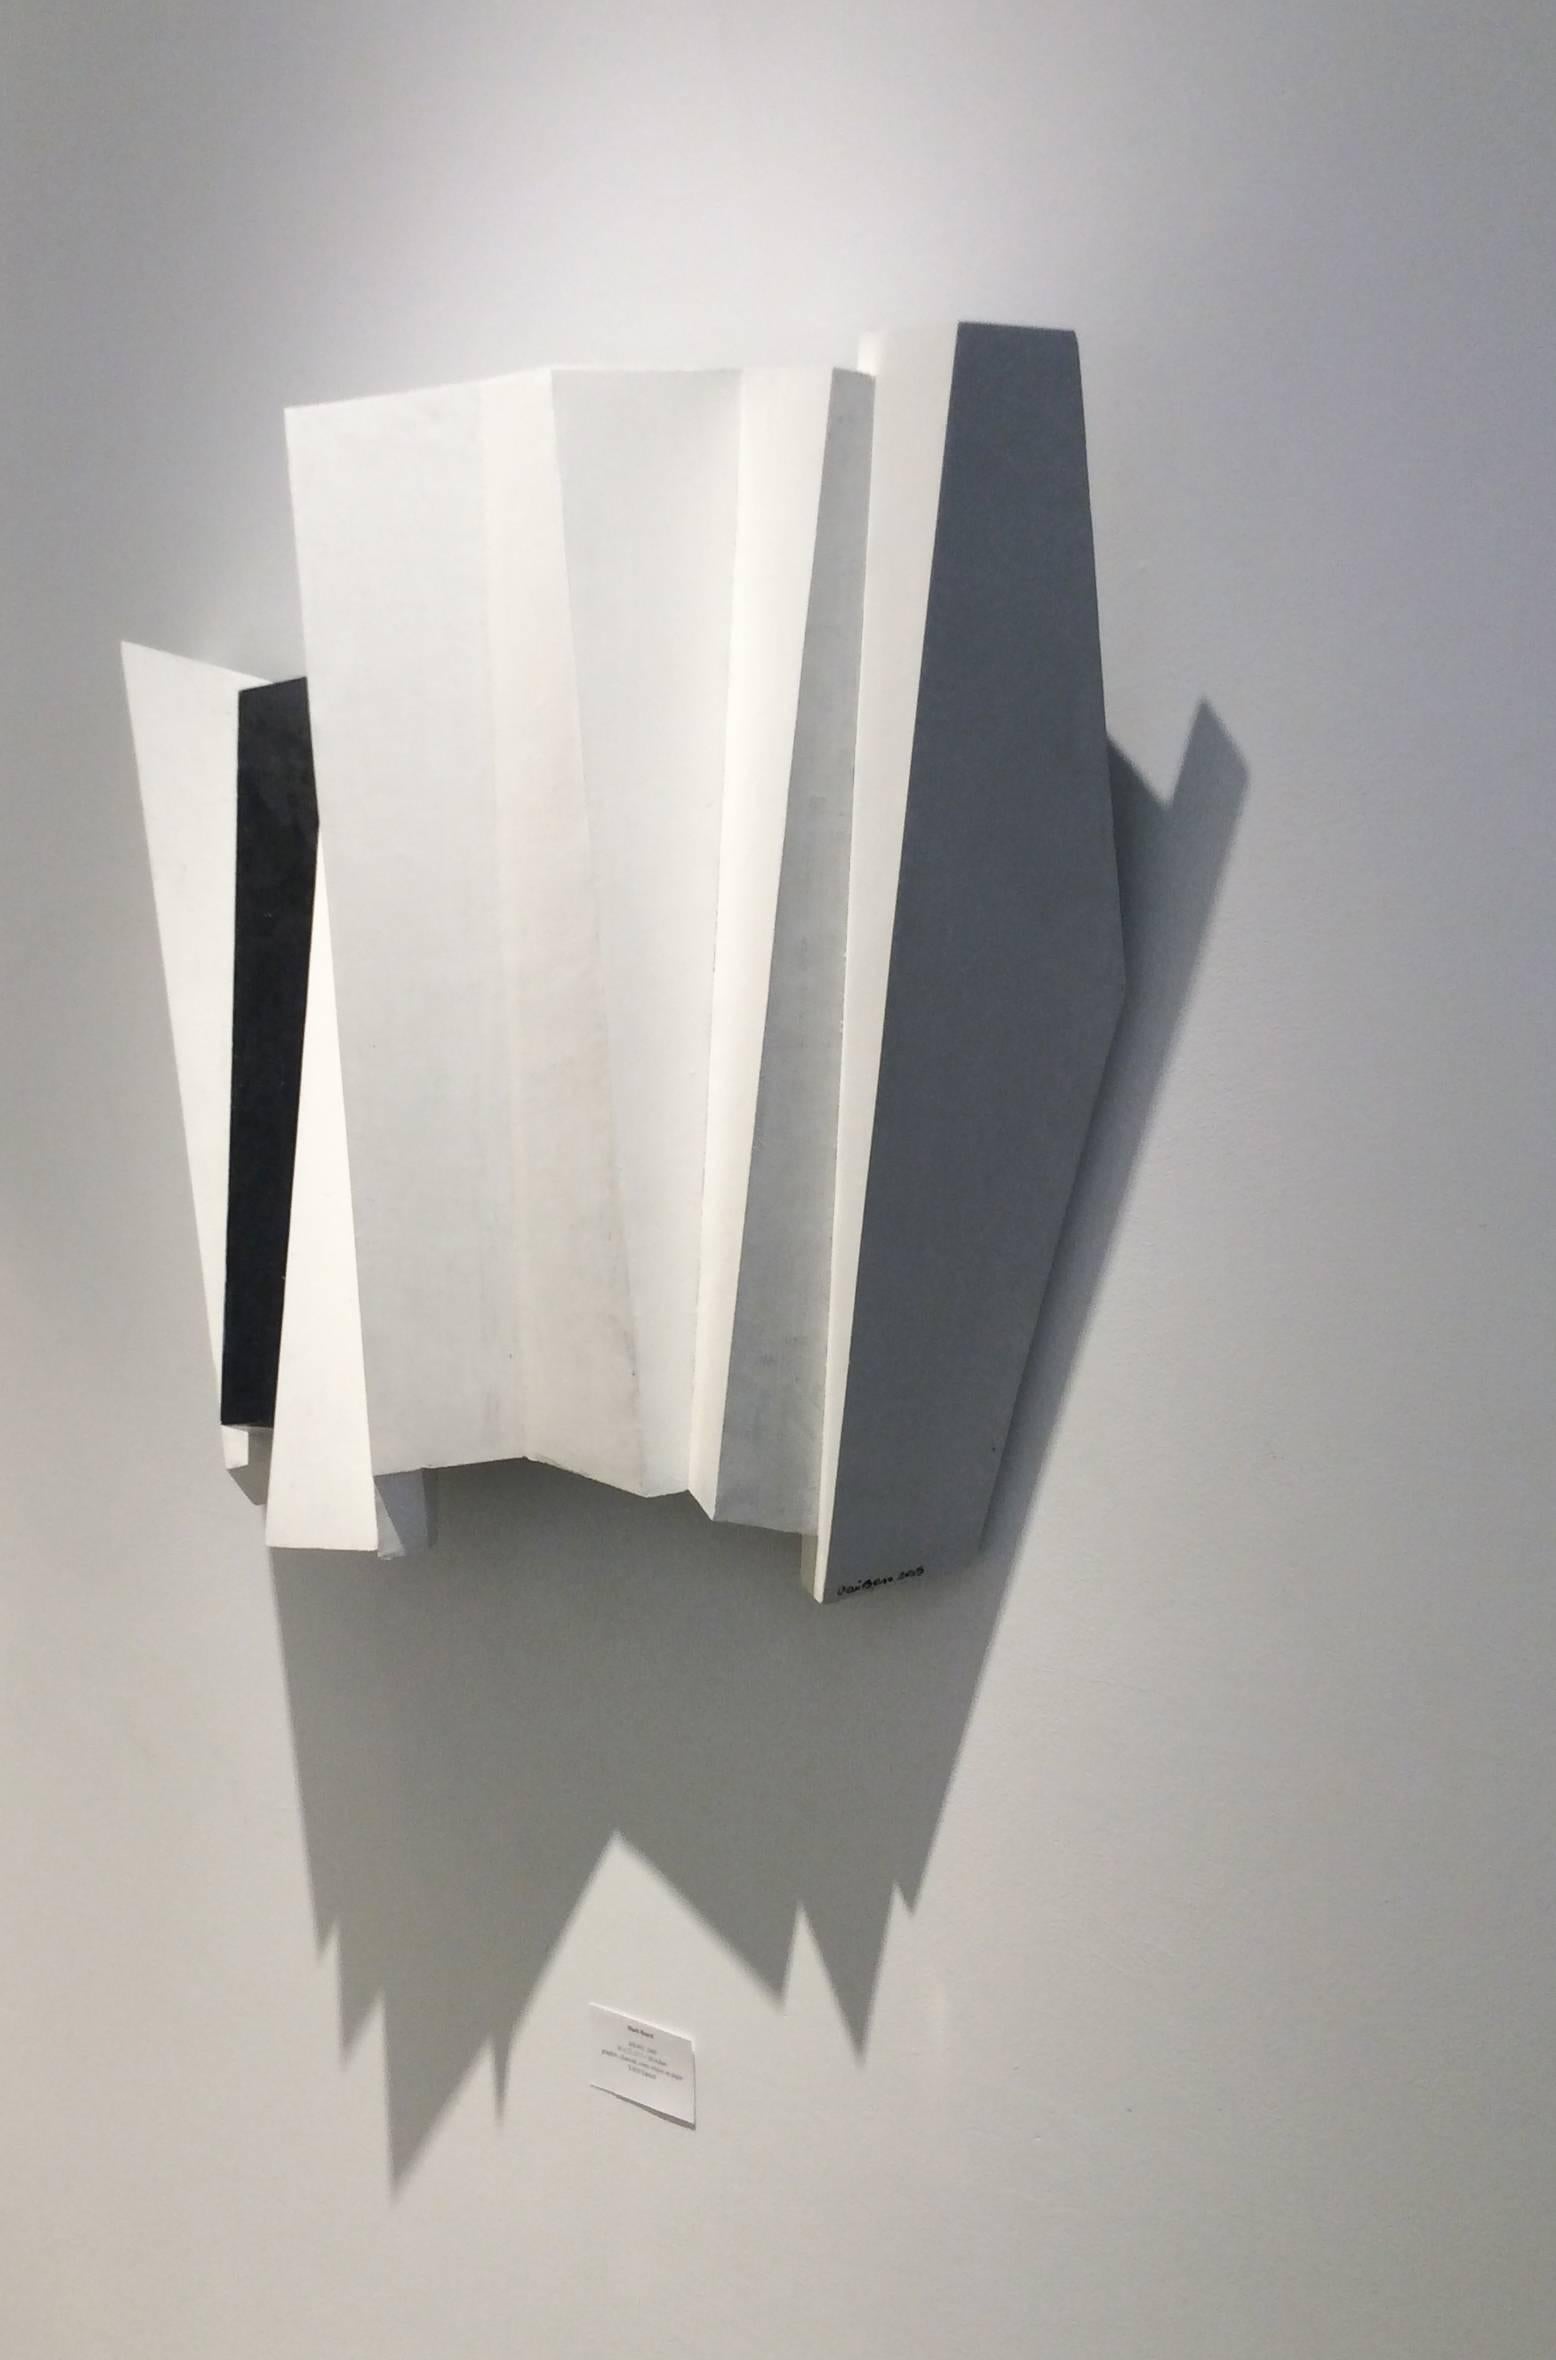 Piano Has Been Drinking: Black & White Modern Minimalist Abstract Wall Sculpture - Gray Abstract Sculpture by Dai Ban